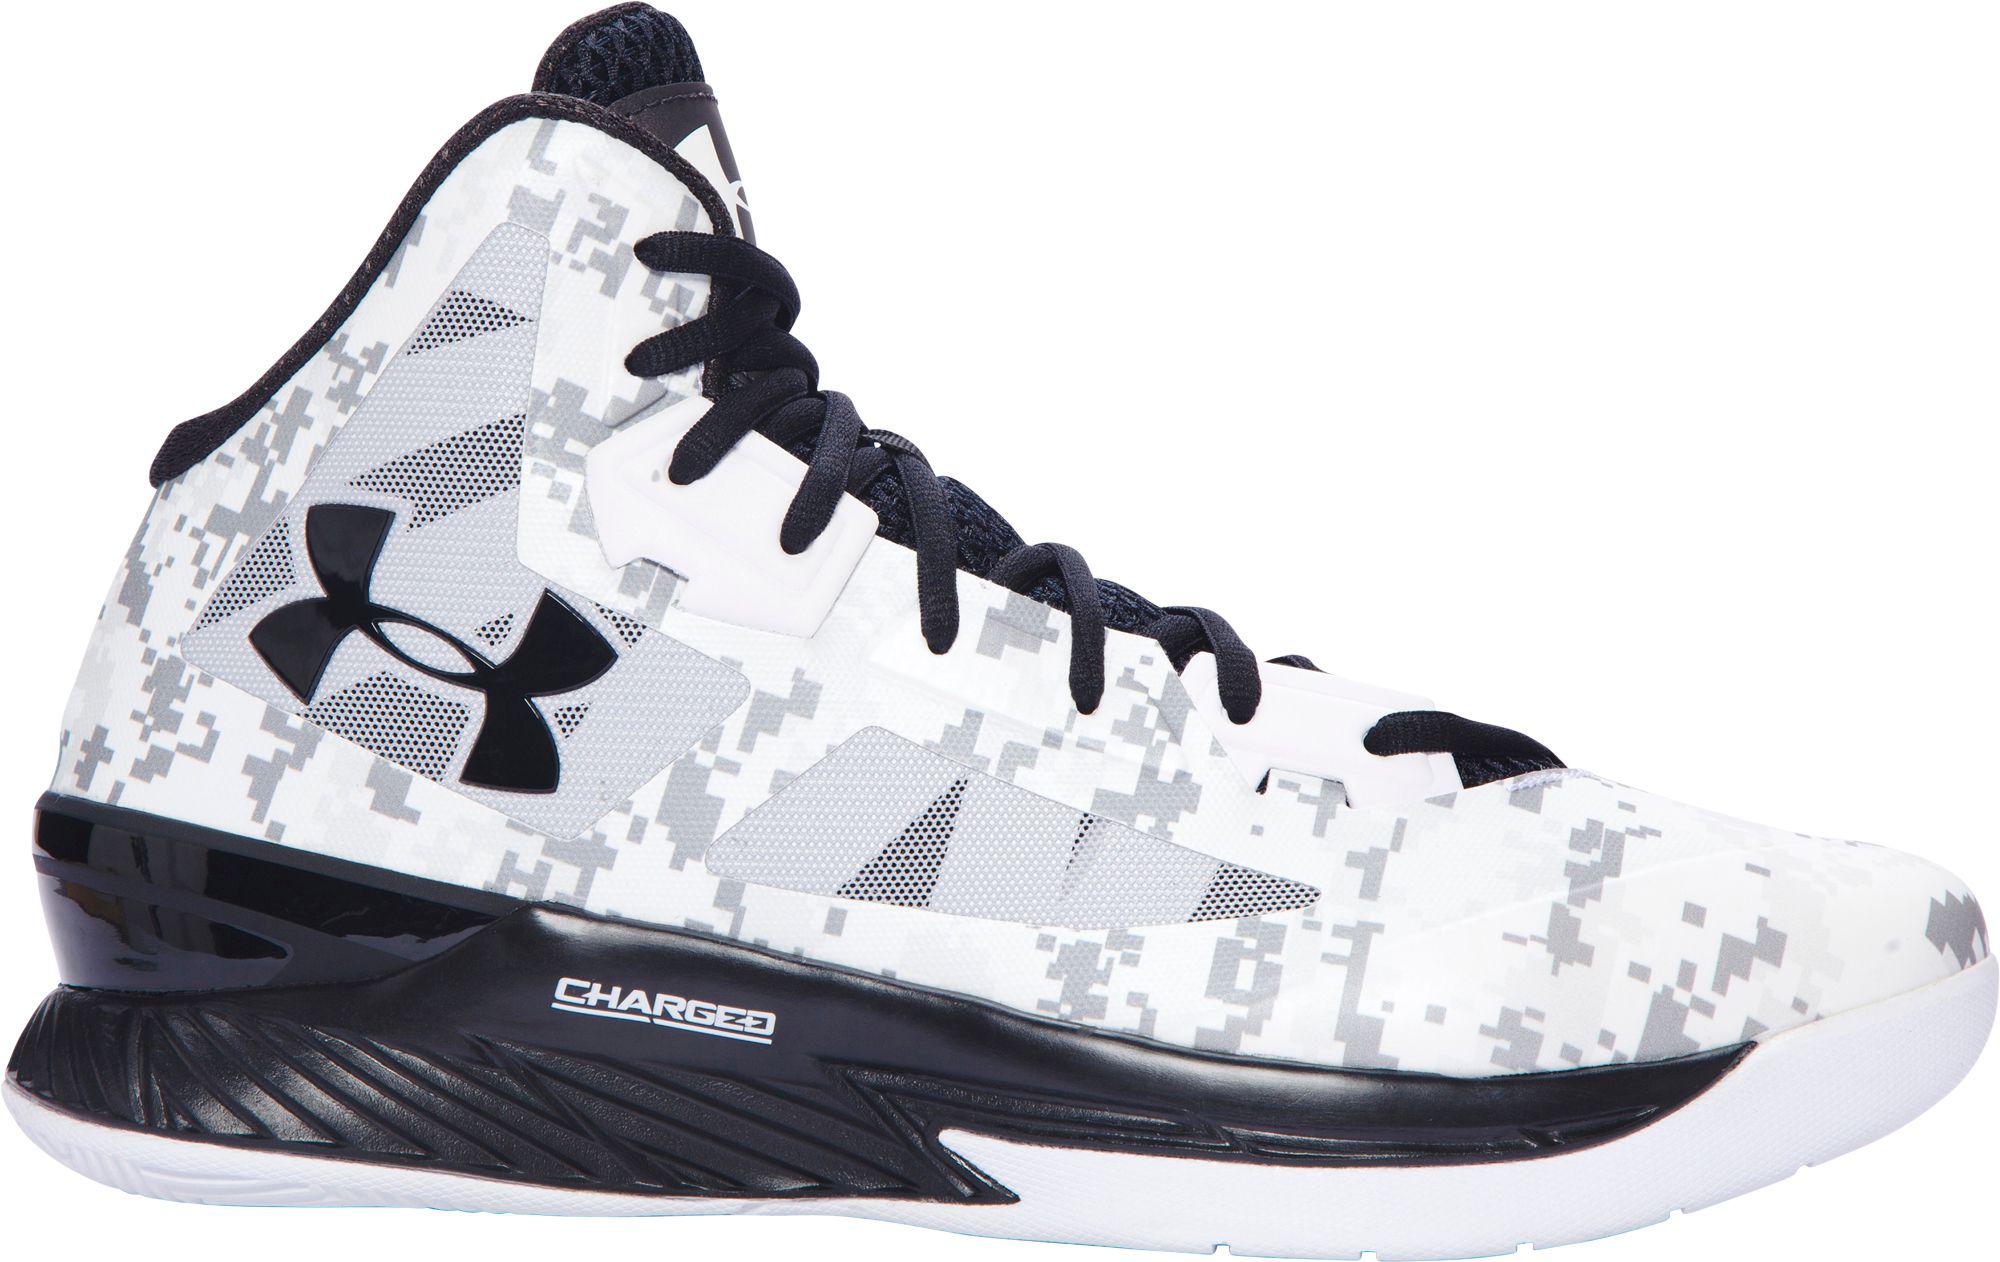 Under Armour Rubber Clutchfit Lightning Basketball Shoes in White/Black ...